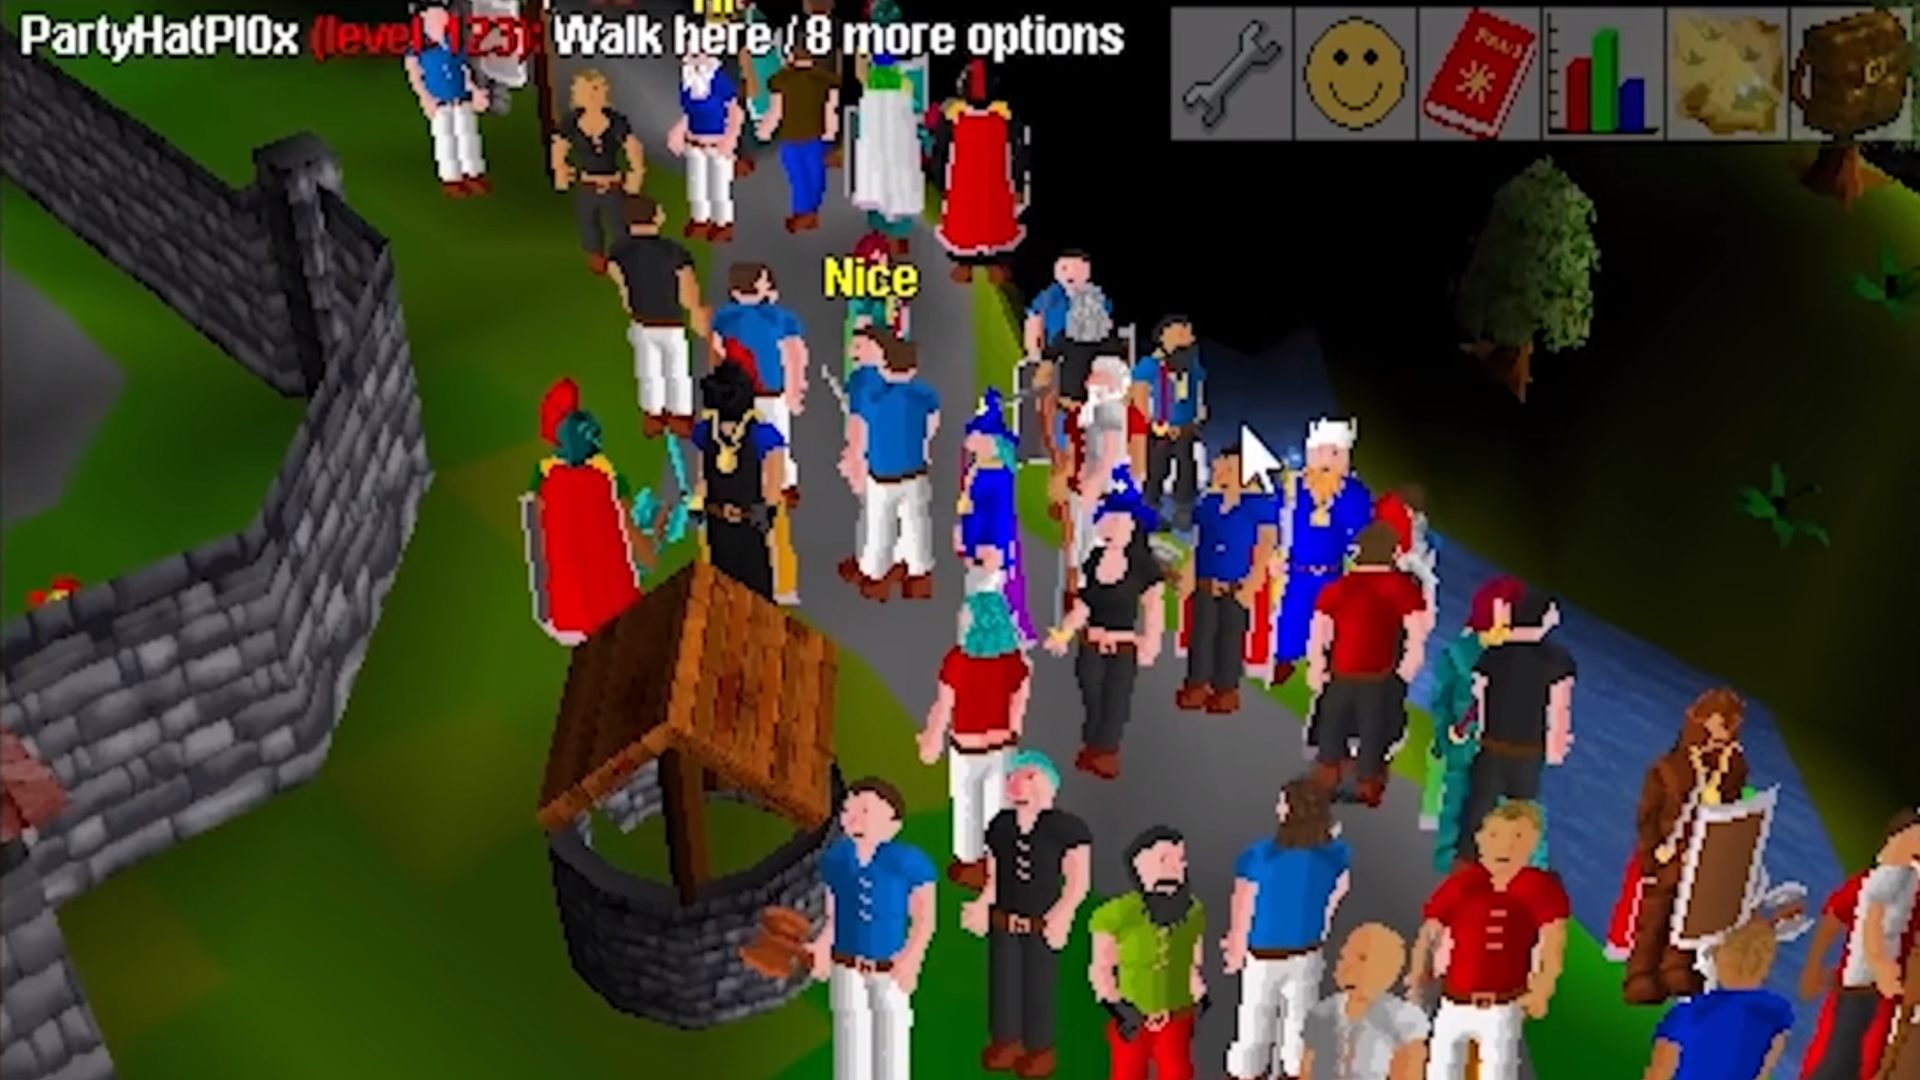 How Runescapes party hat became so valuable